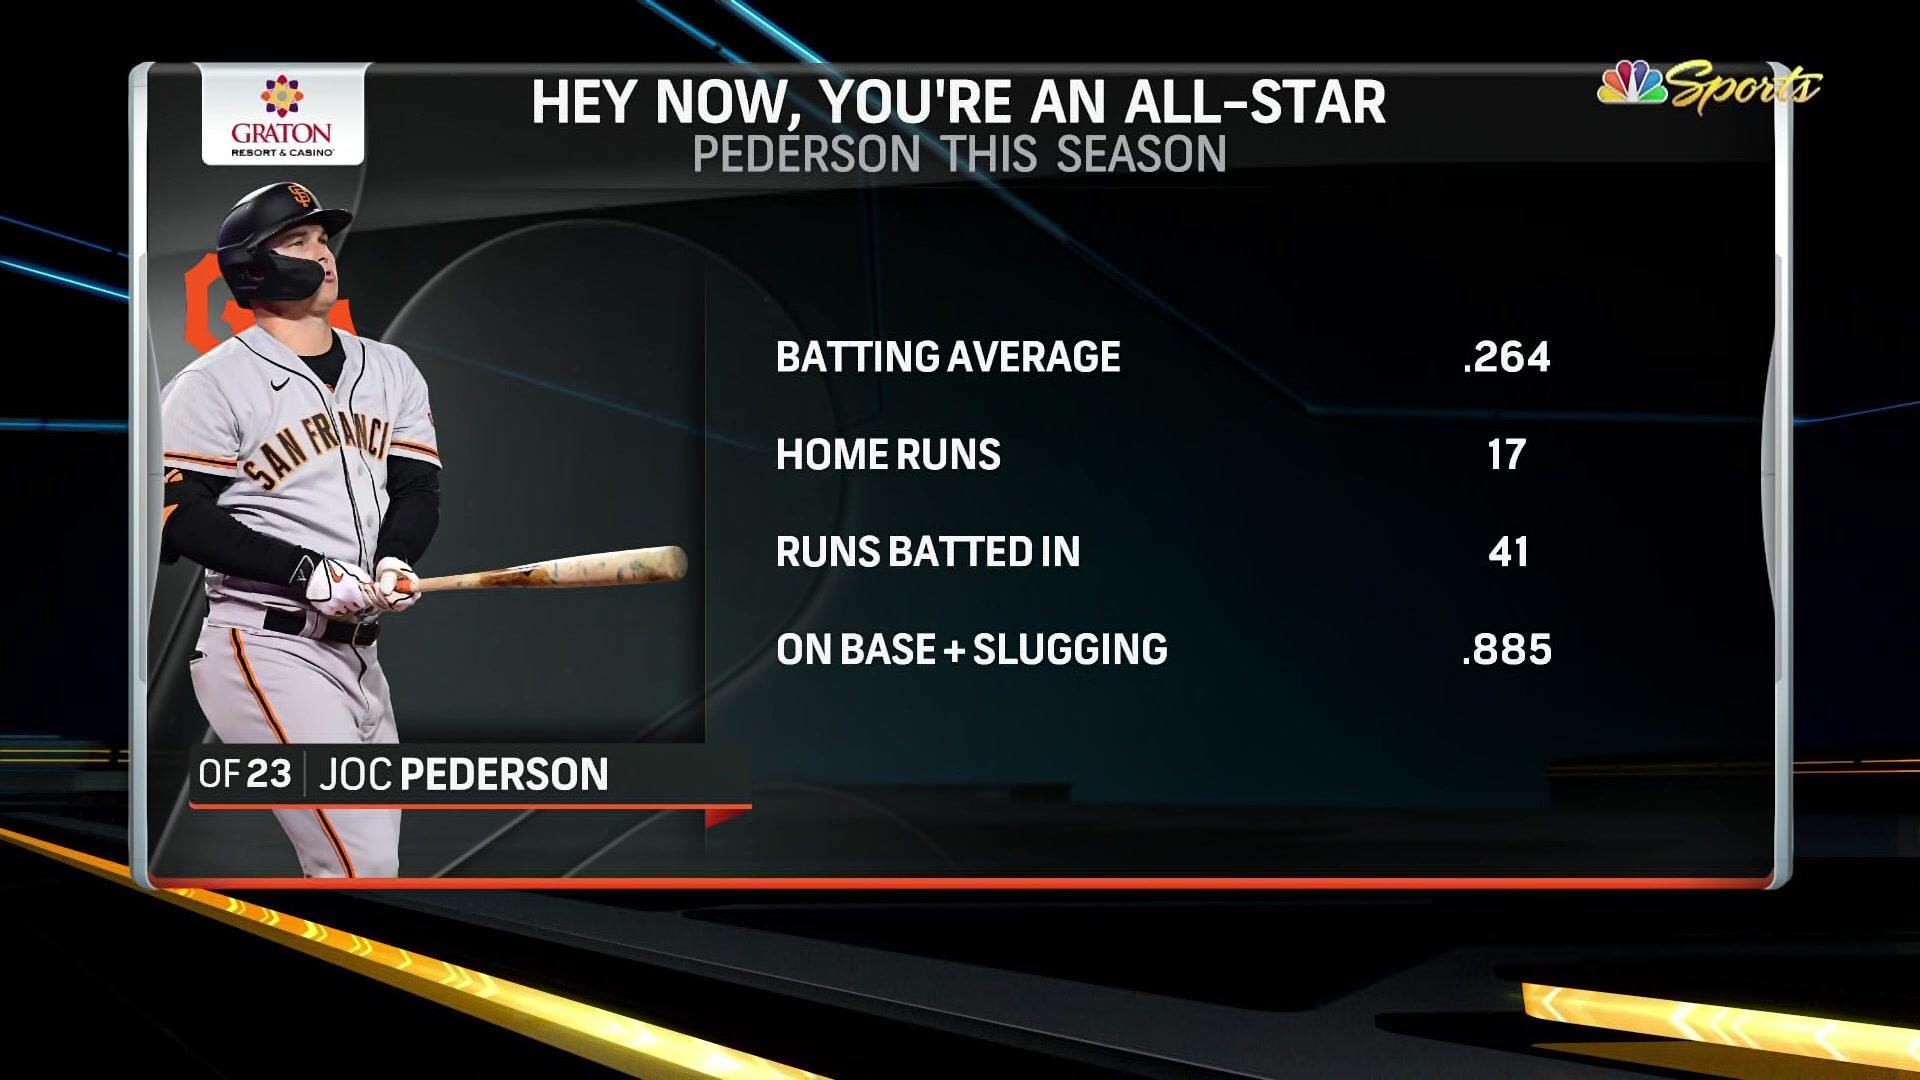 Giants' Joc Pederson is an All-Star starter, but it's easy to not